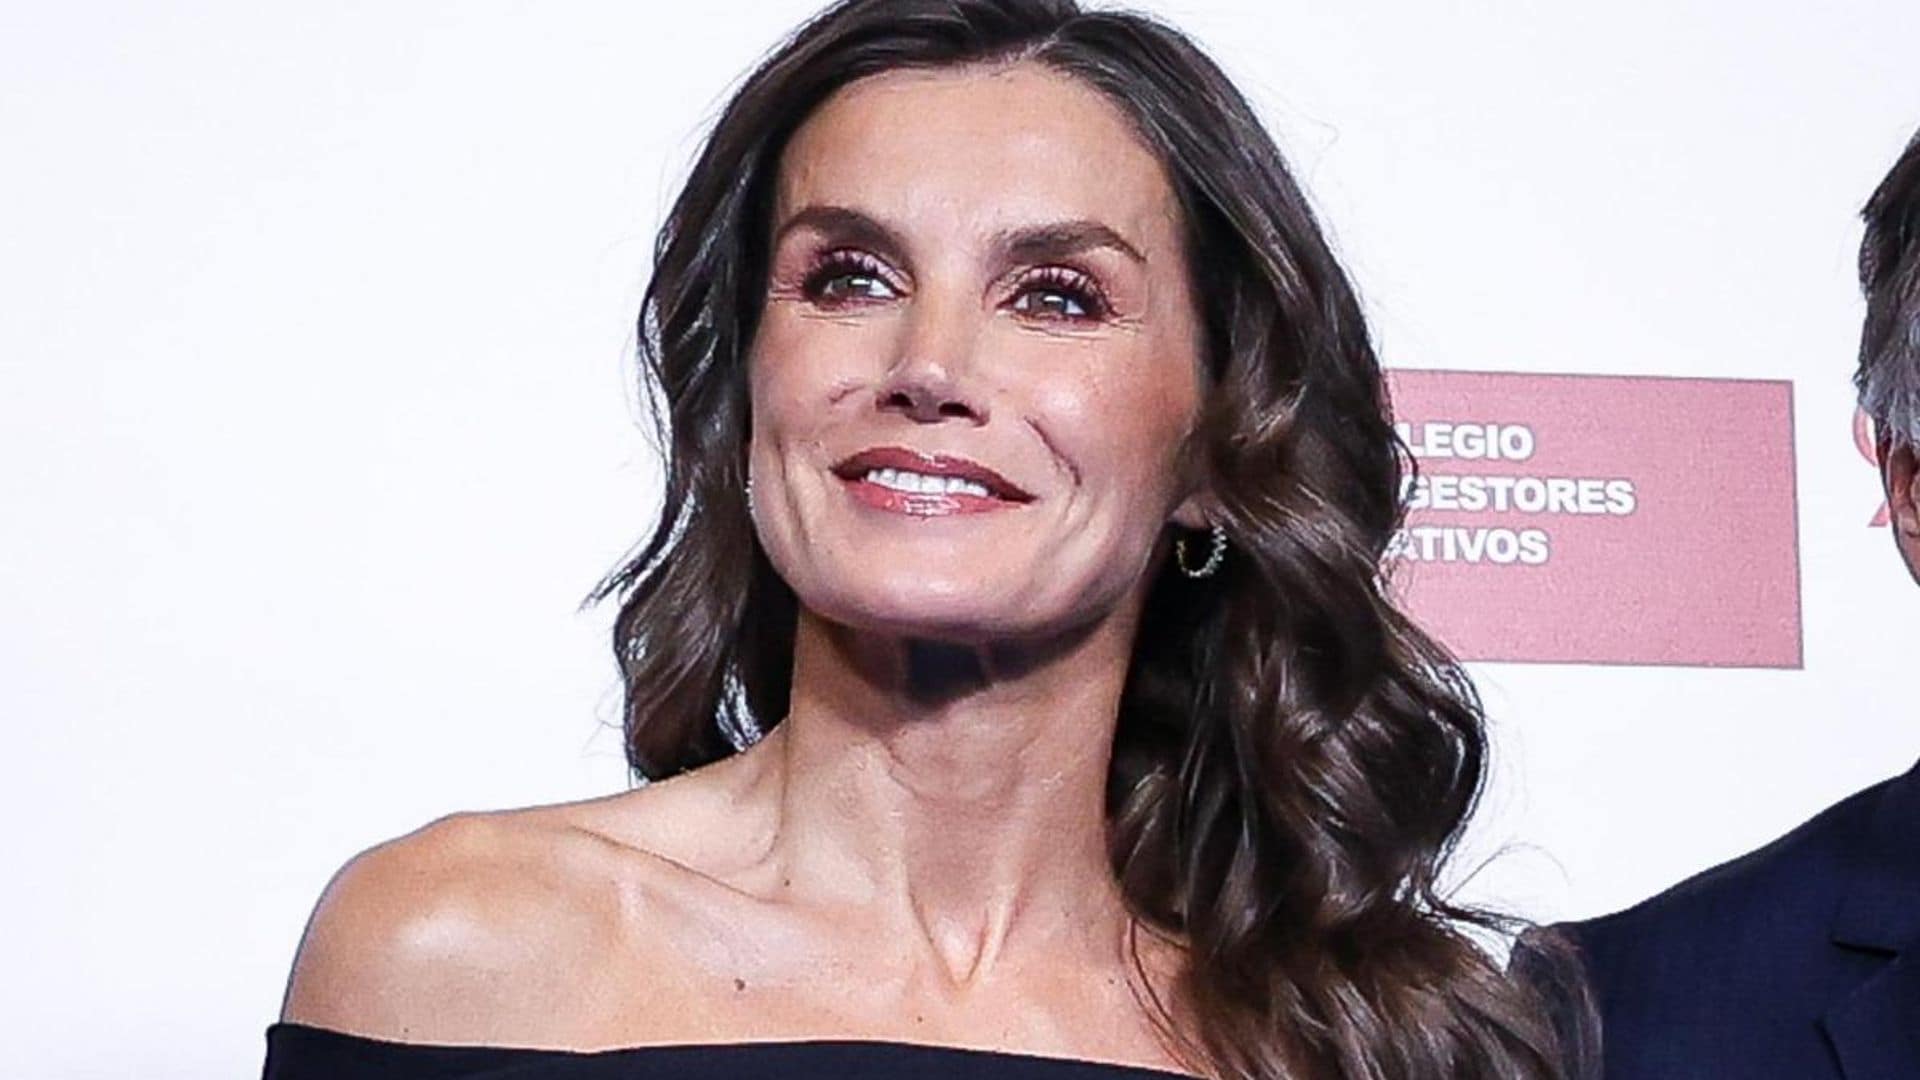 Queen Letizia steps out in fabulous form-fitting dress